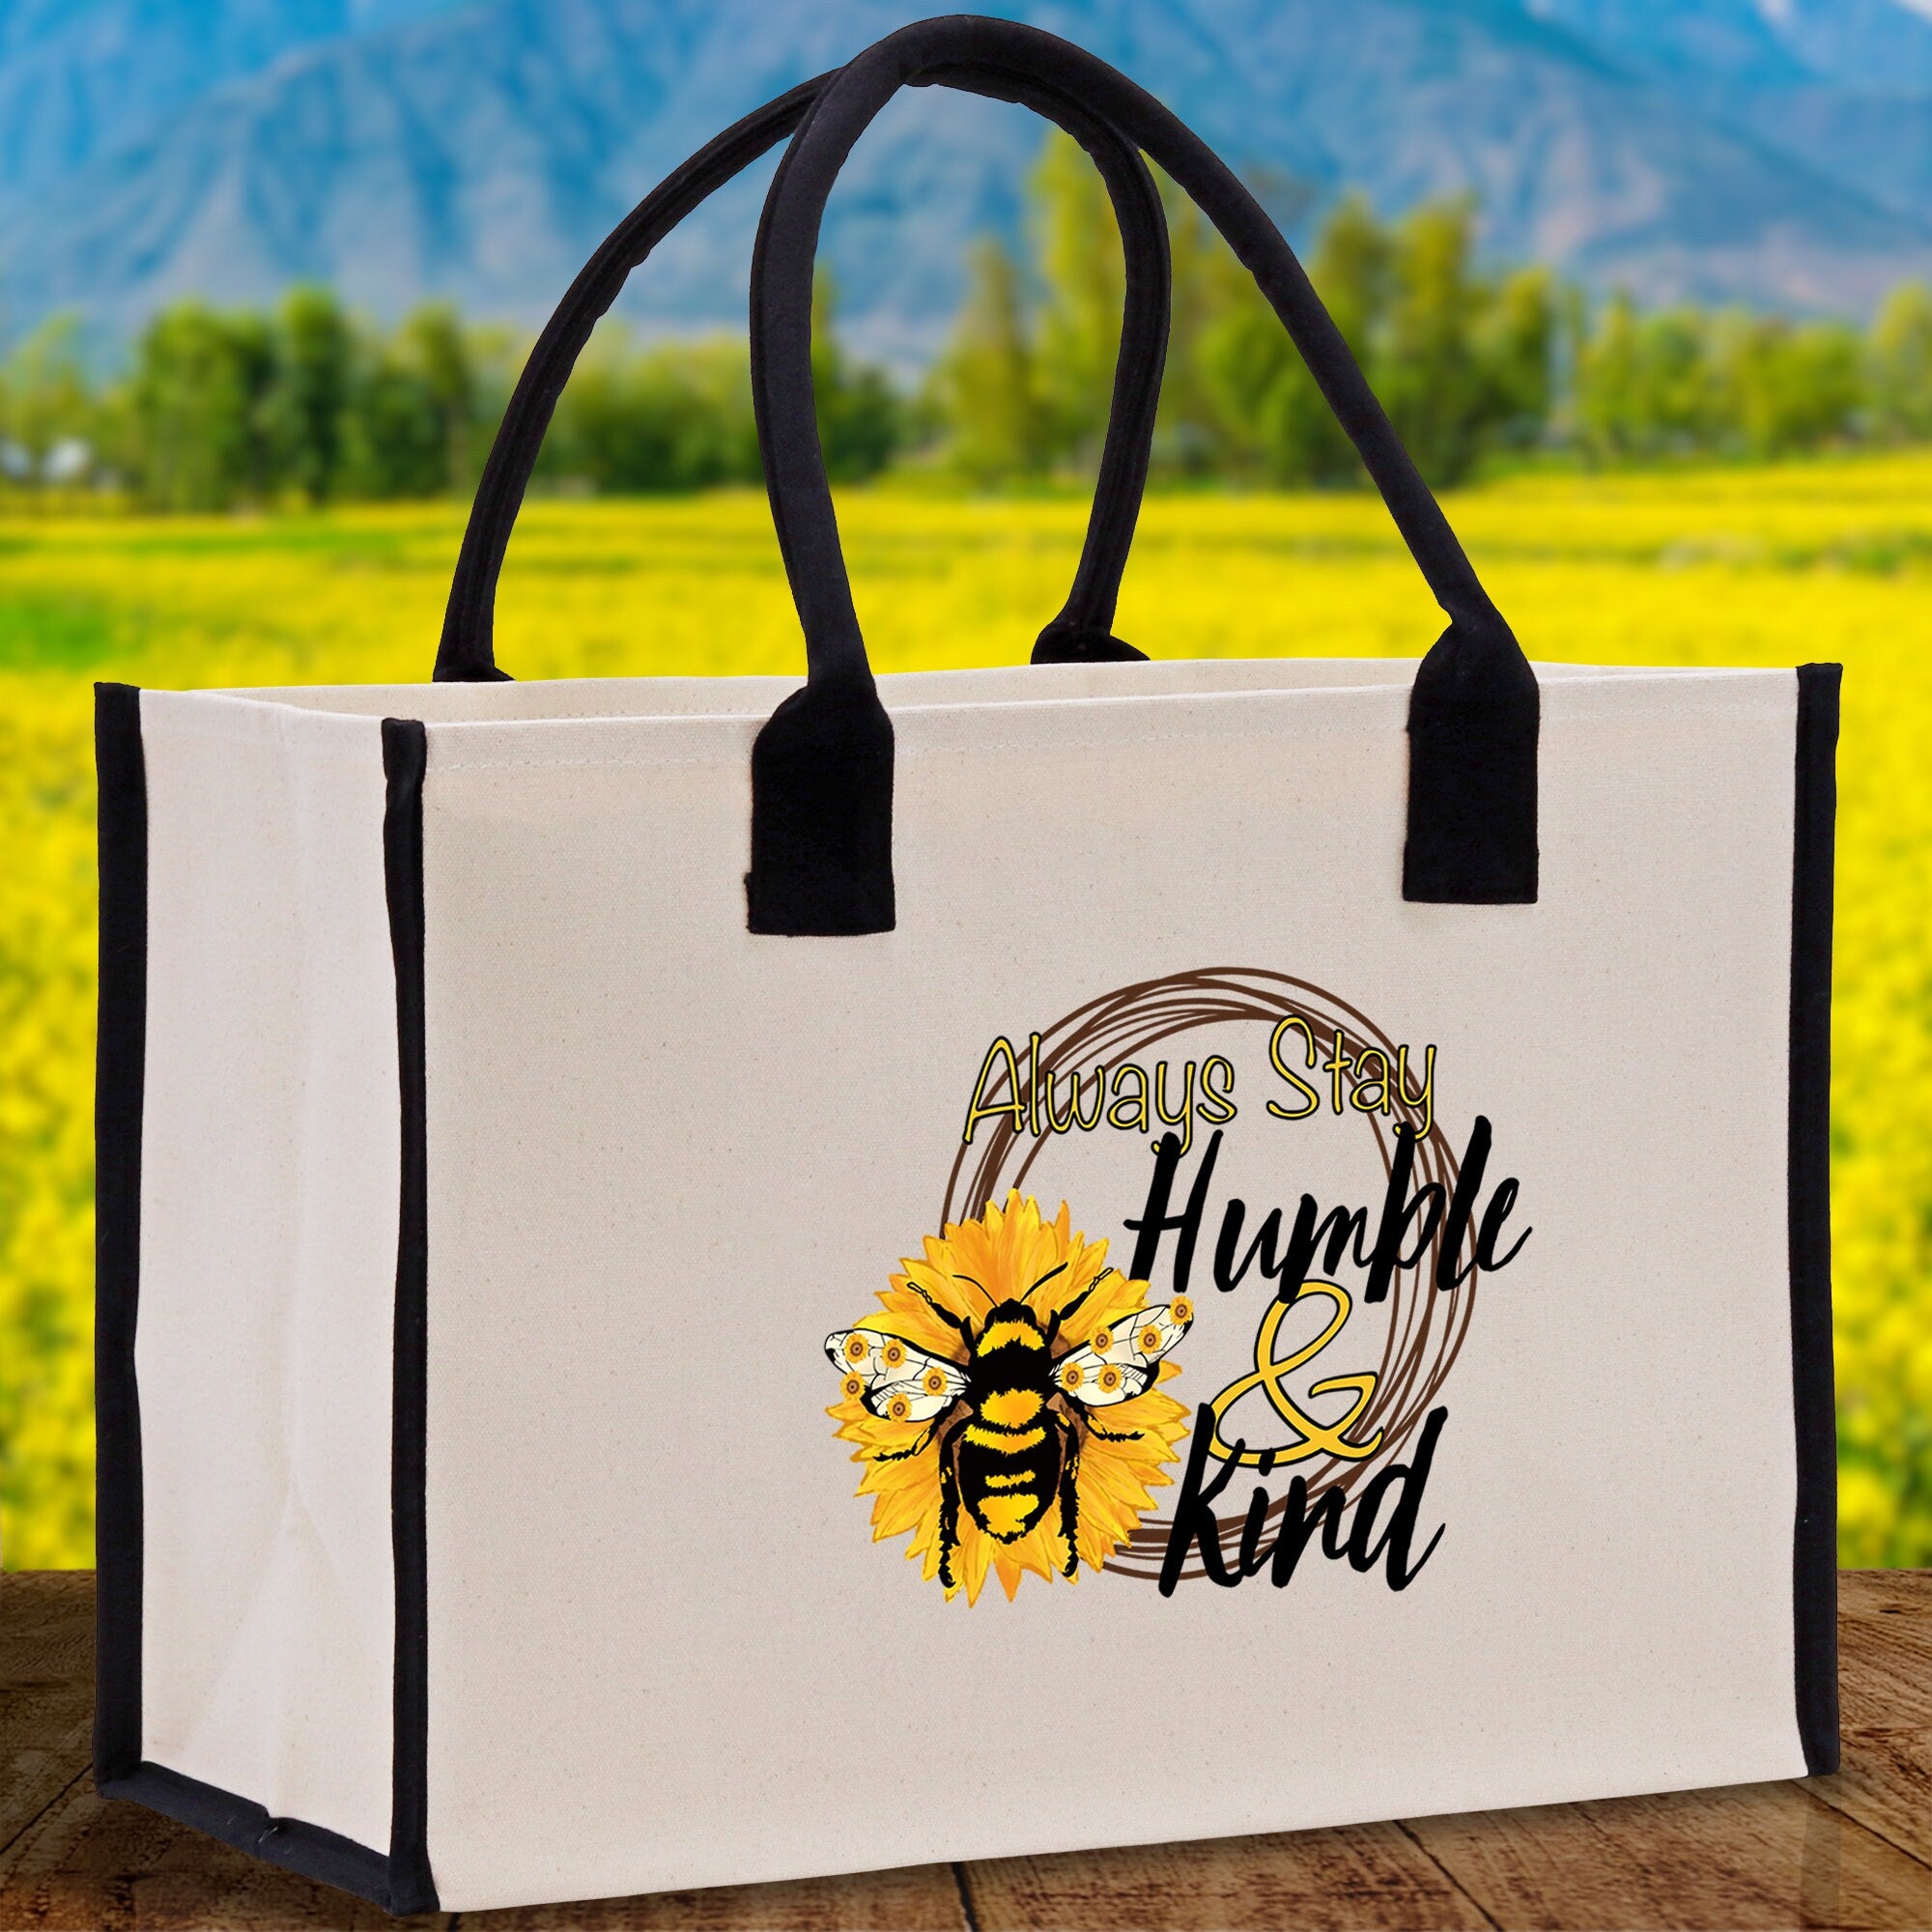 Always Stay Humble & Kind Cotton Canvas Tote Bag Nurse Appreciation Gift Bag Gift for Her Birthday Gift Bee Kind Mental Health Matters